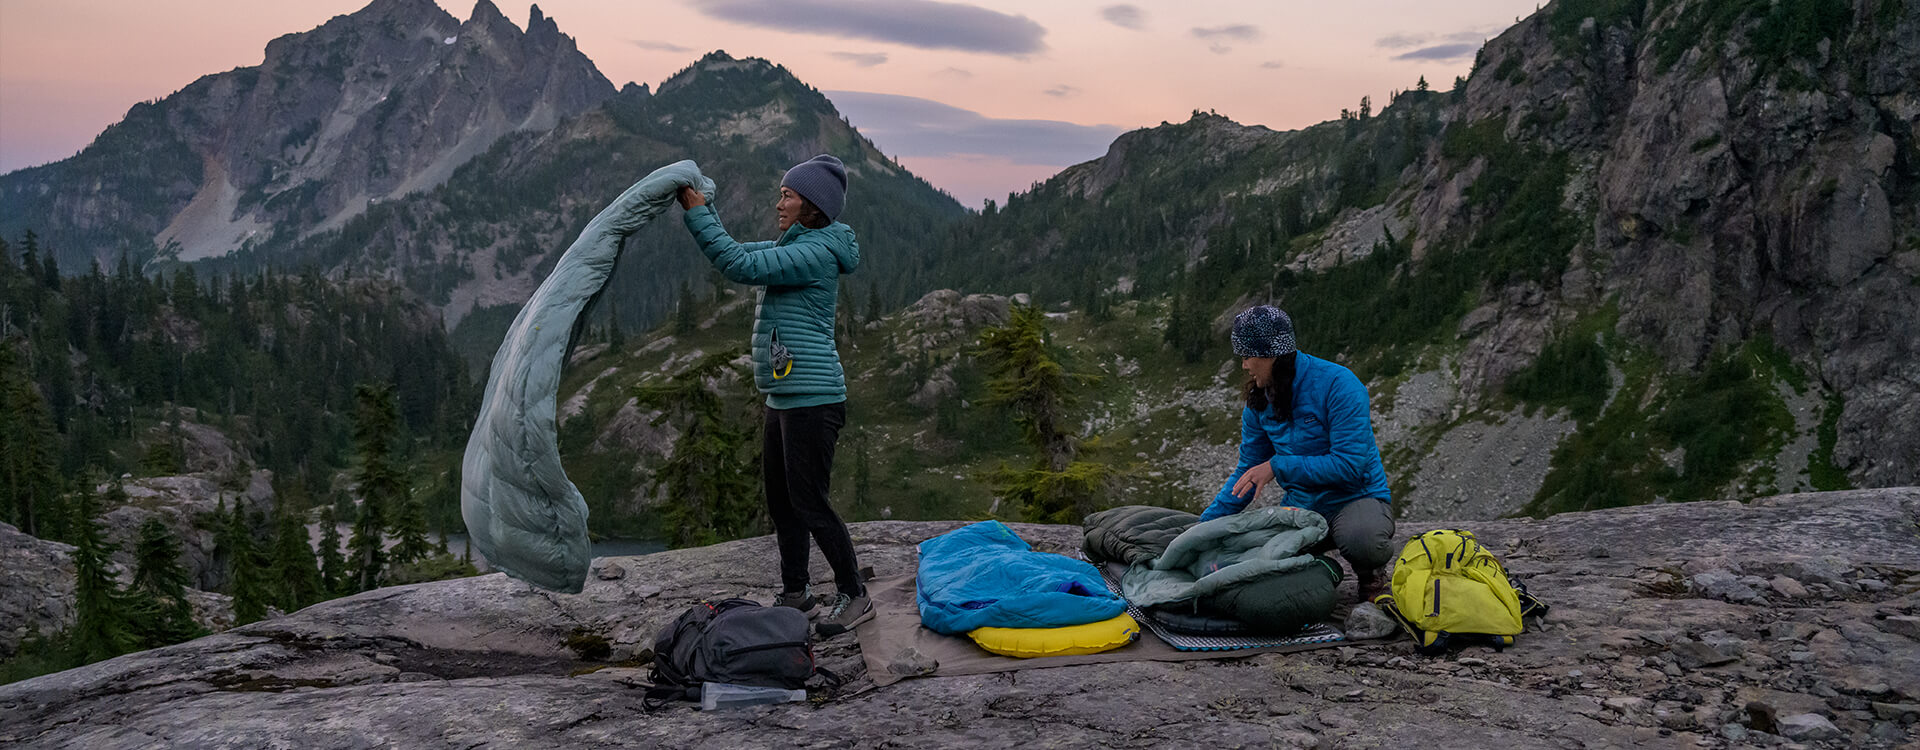 ﻿Sleep Systems for Every Camp - Sleep better wherever you end up.